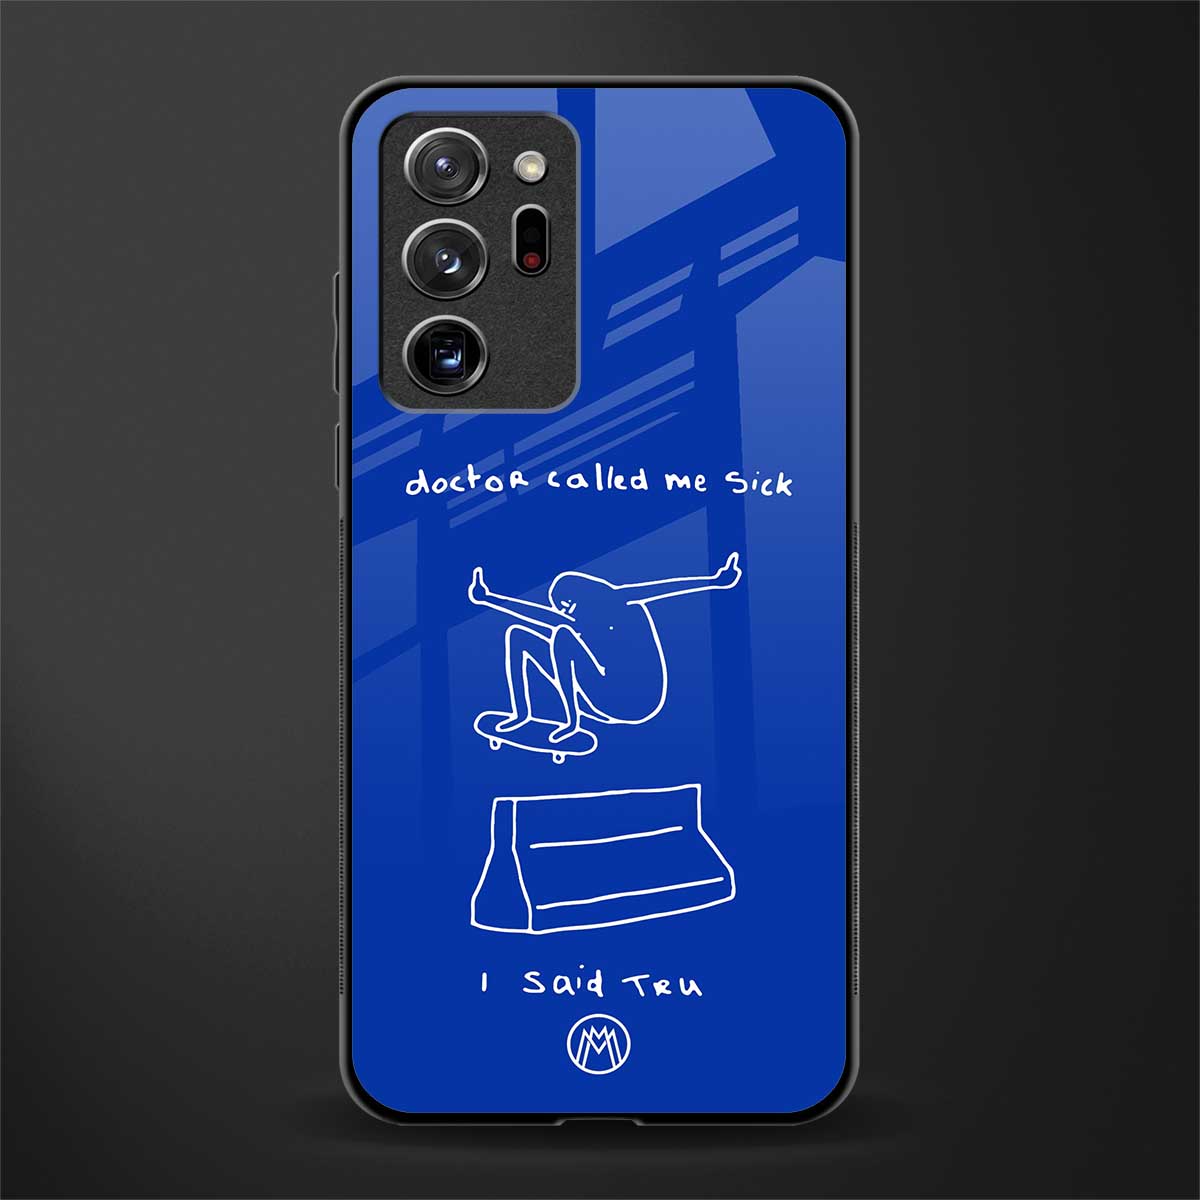 sick skateboarder blue doodle glass case for samsung galaxy note 20 ultra 5g image